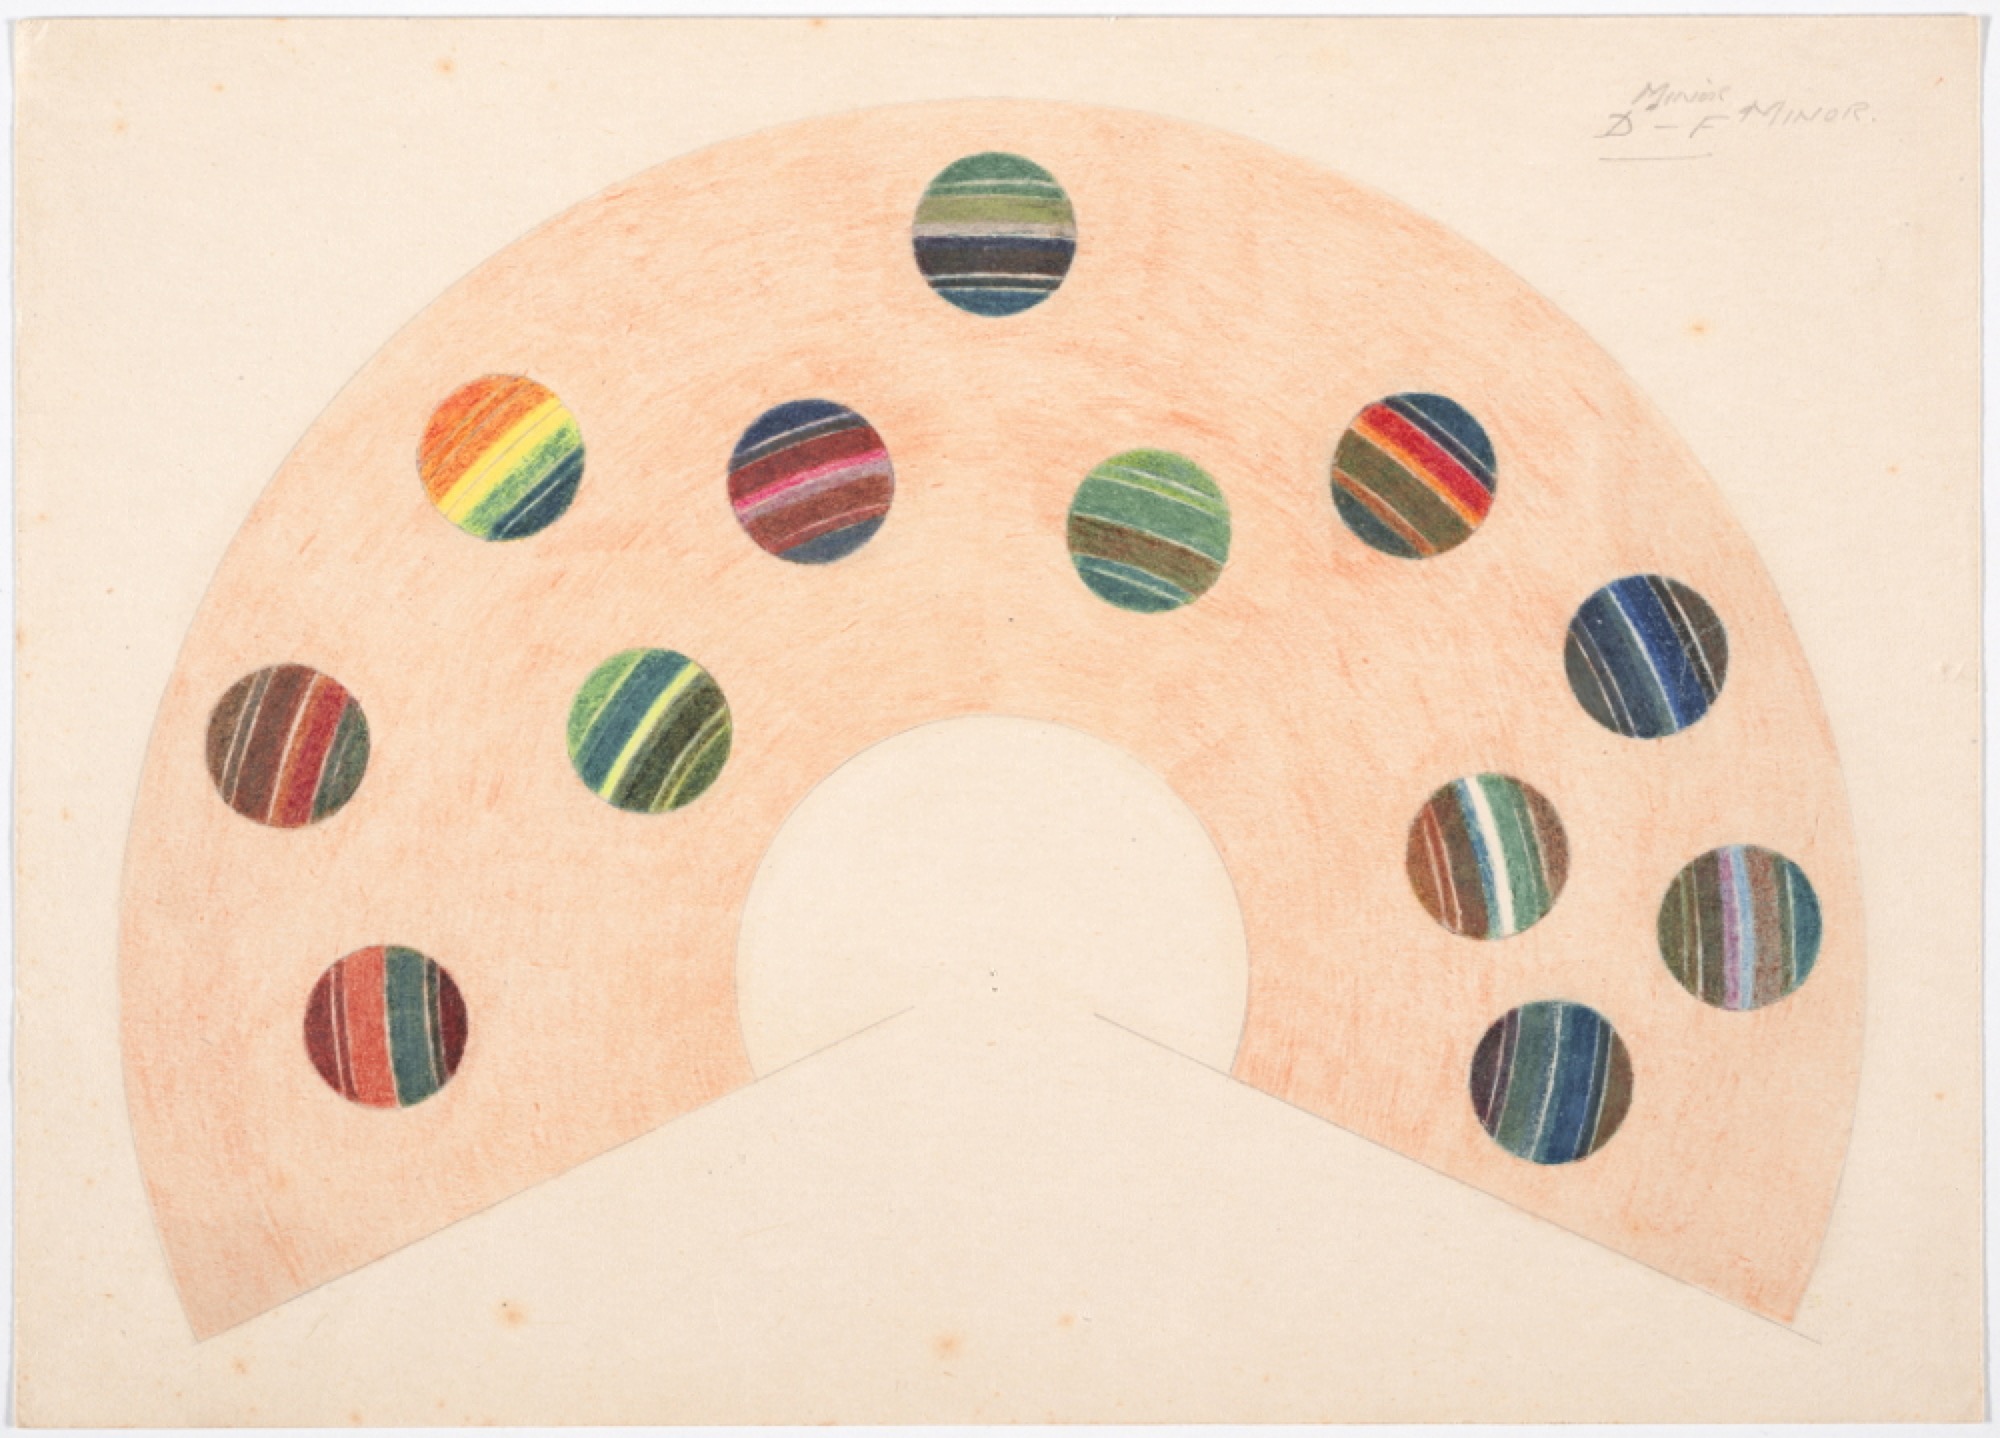 Roy de Maistre, <em>Rainbow scale. D# Minor - F# Minor</em>, 1930s, coloured crayon, pencil. Art Gallery of New South Wales. Gift of Sir John Rothenstein in memory of the artist, 1969. Photograph: AGNSW. Courtesy of Caroline de Mestre Walker.